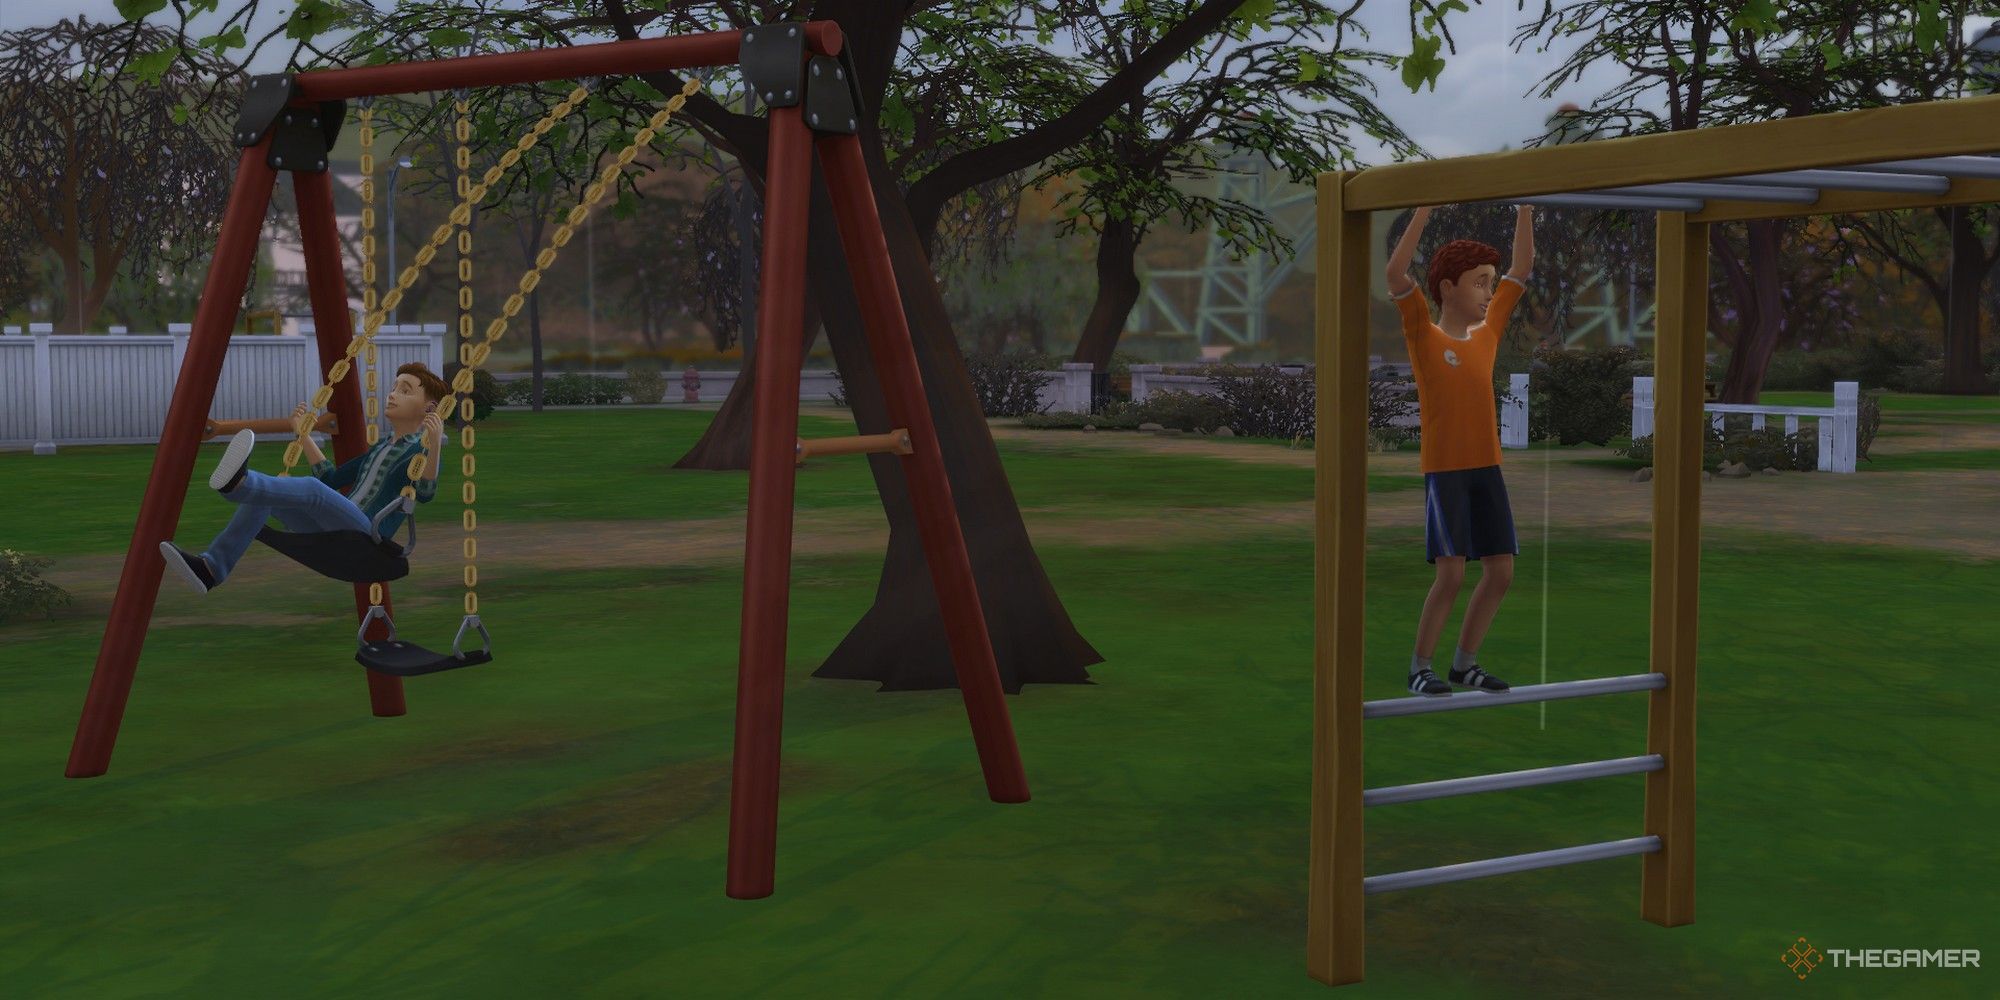 two child sims playing on playground equipment outside the sims 4 motor skill children skills